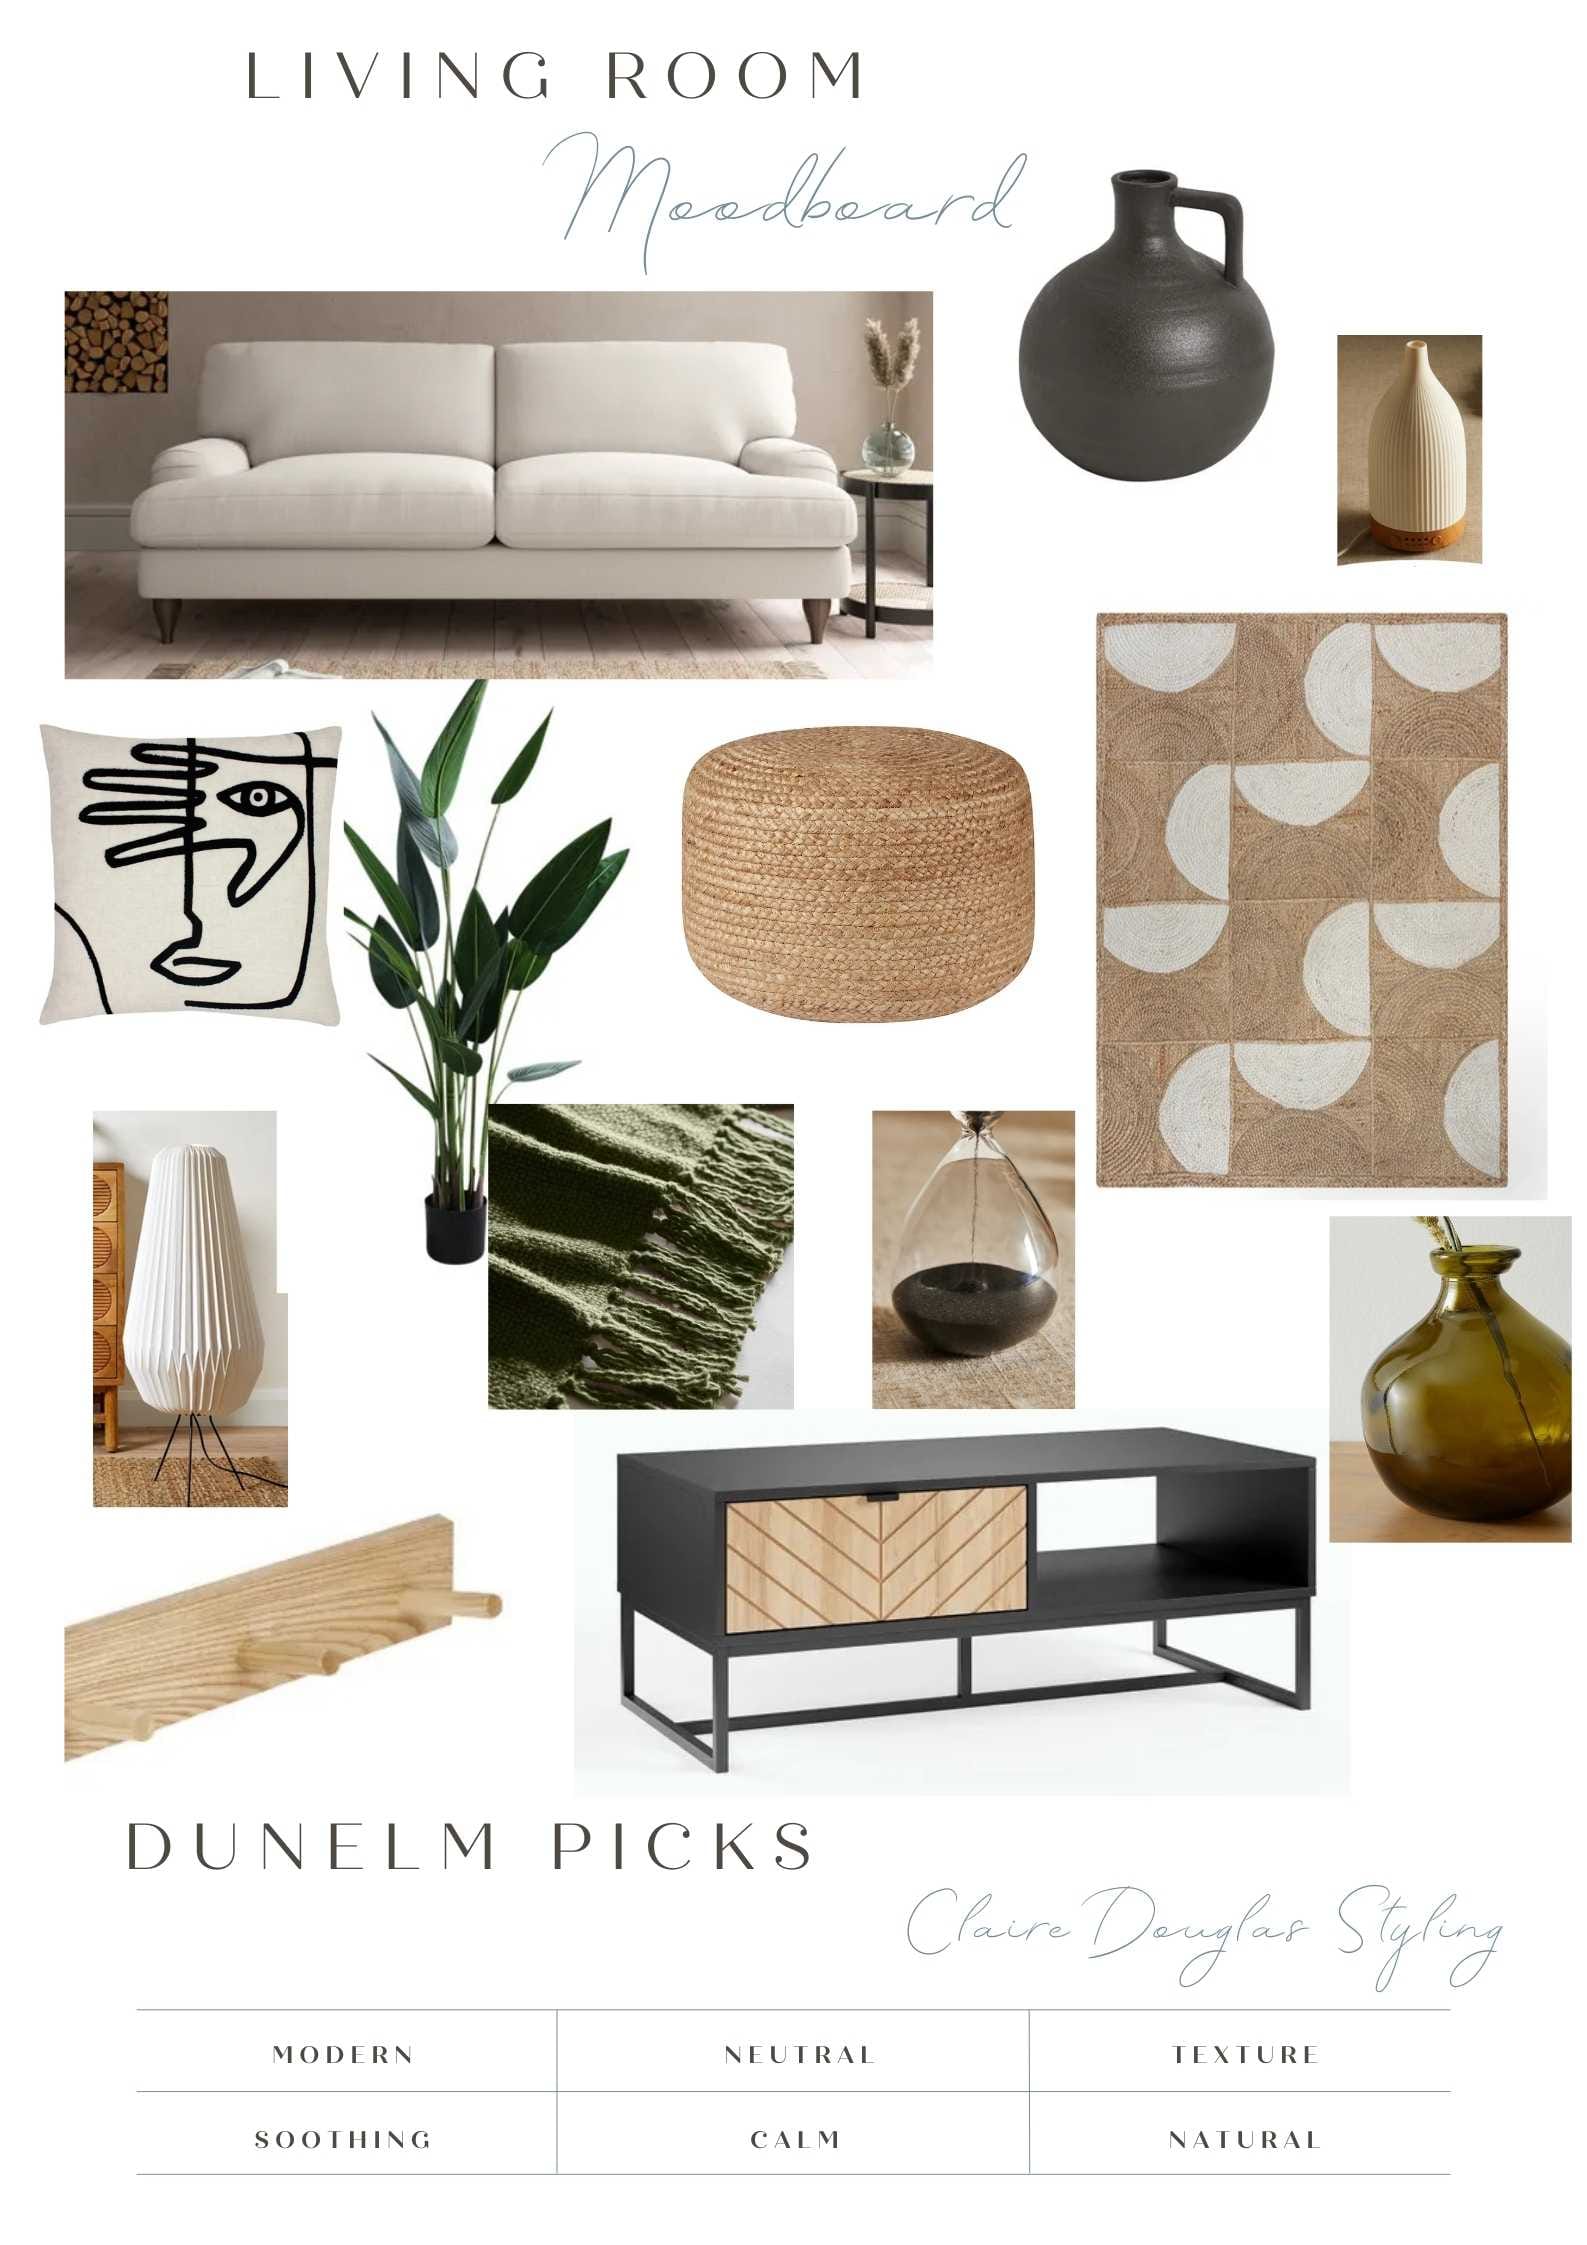 Shoppable mood boards and stylish homeware finds on a budget